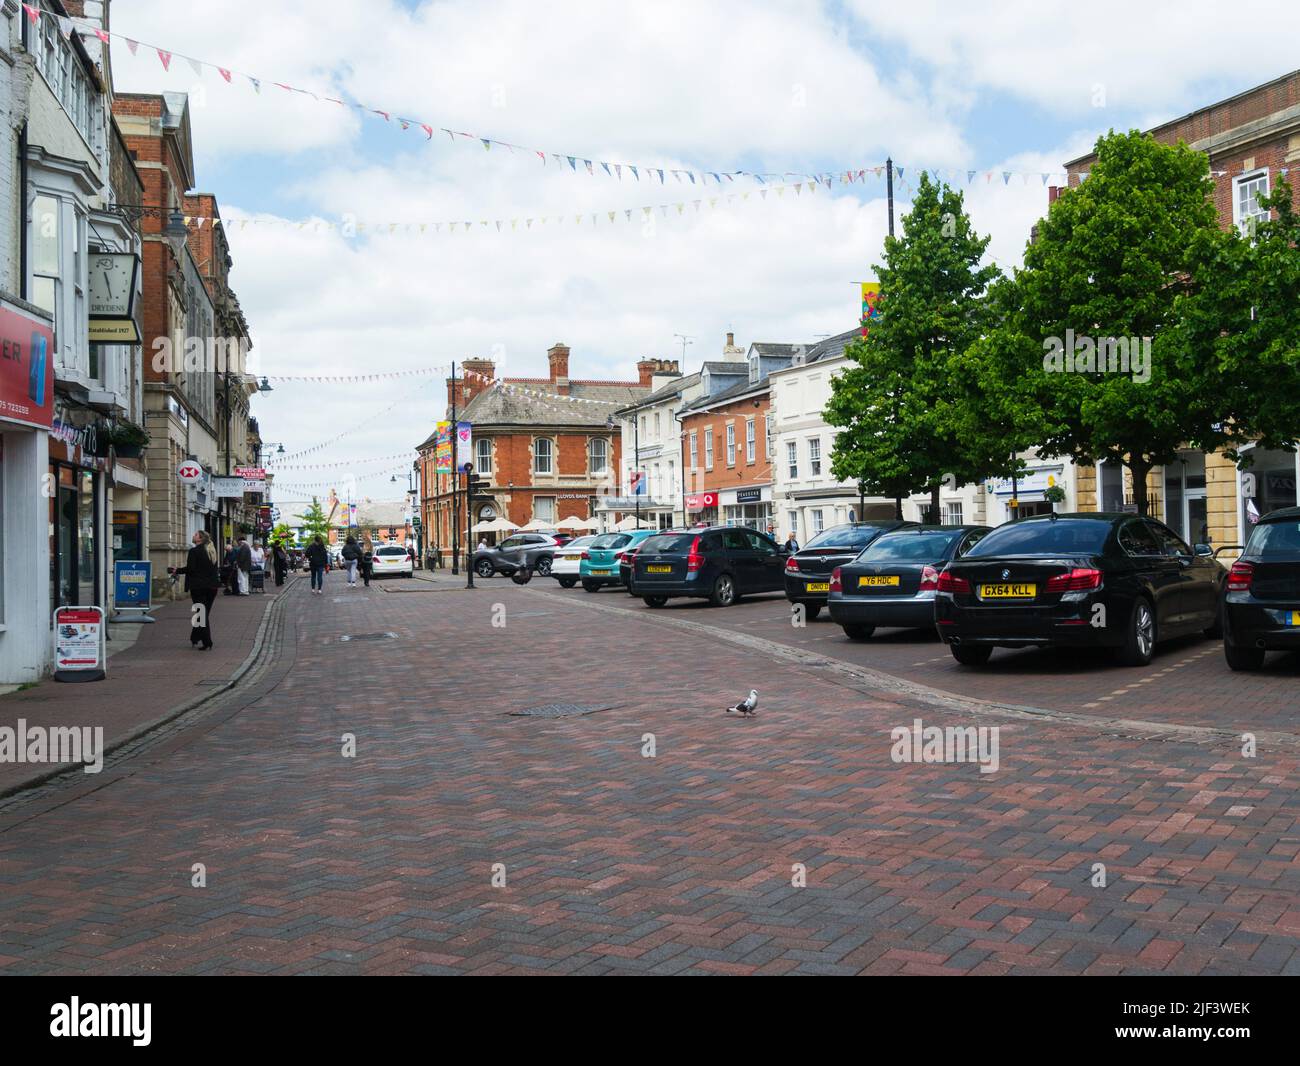 Market Place Spalding Lincolnshire England UK with a variety of national and independent shops Stock Photo